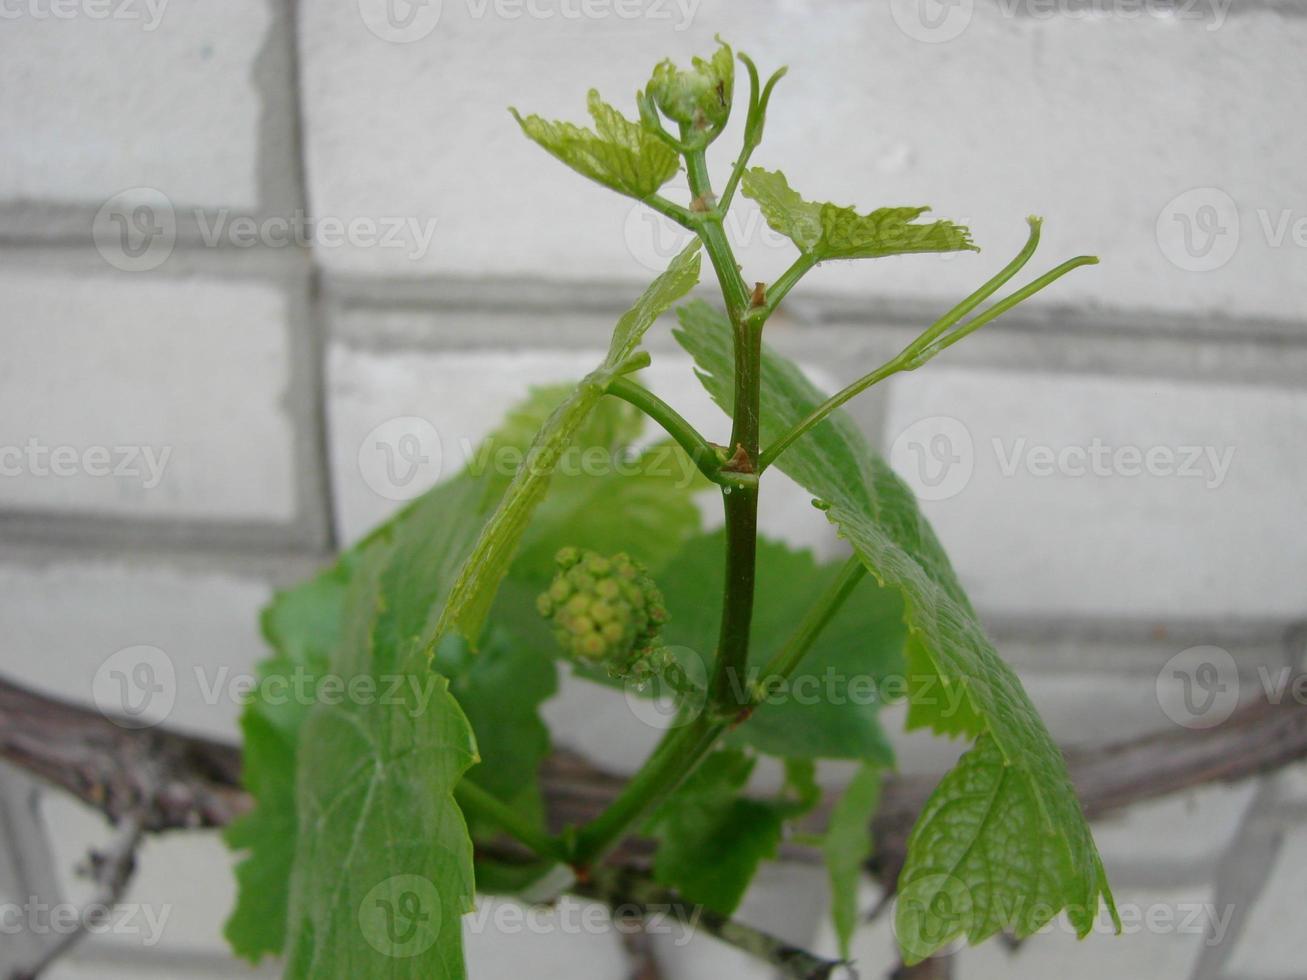 Flowering of a grapevine. Young branches of grapes with peduncles about to bloom in spring photo